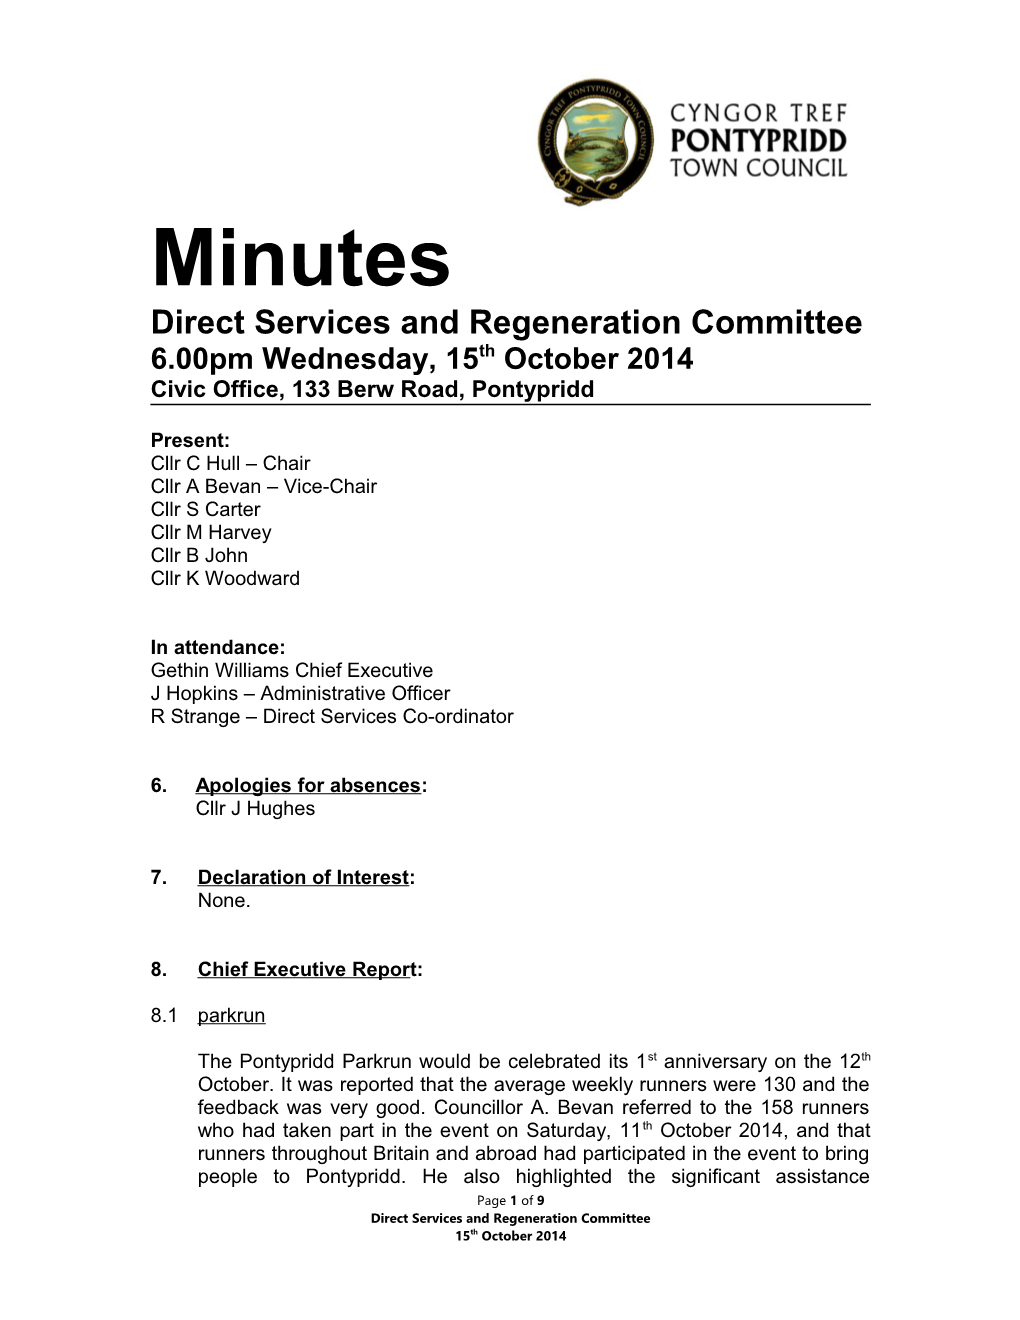 Direct Services and Regeneration Committee